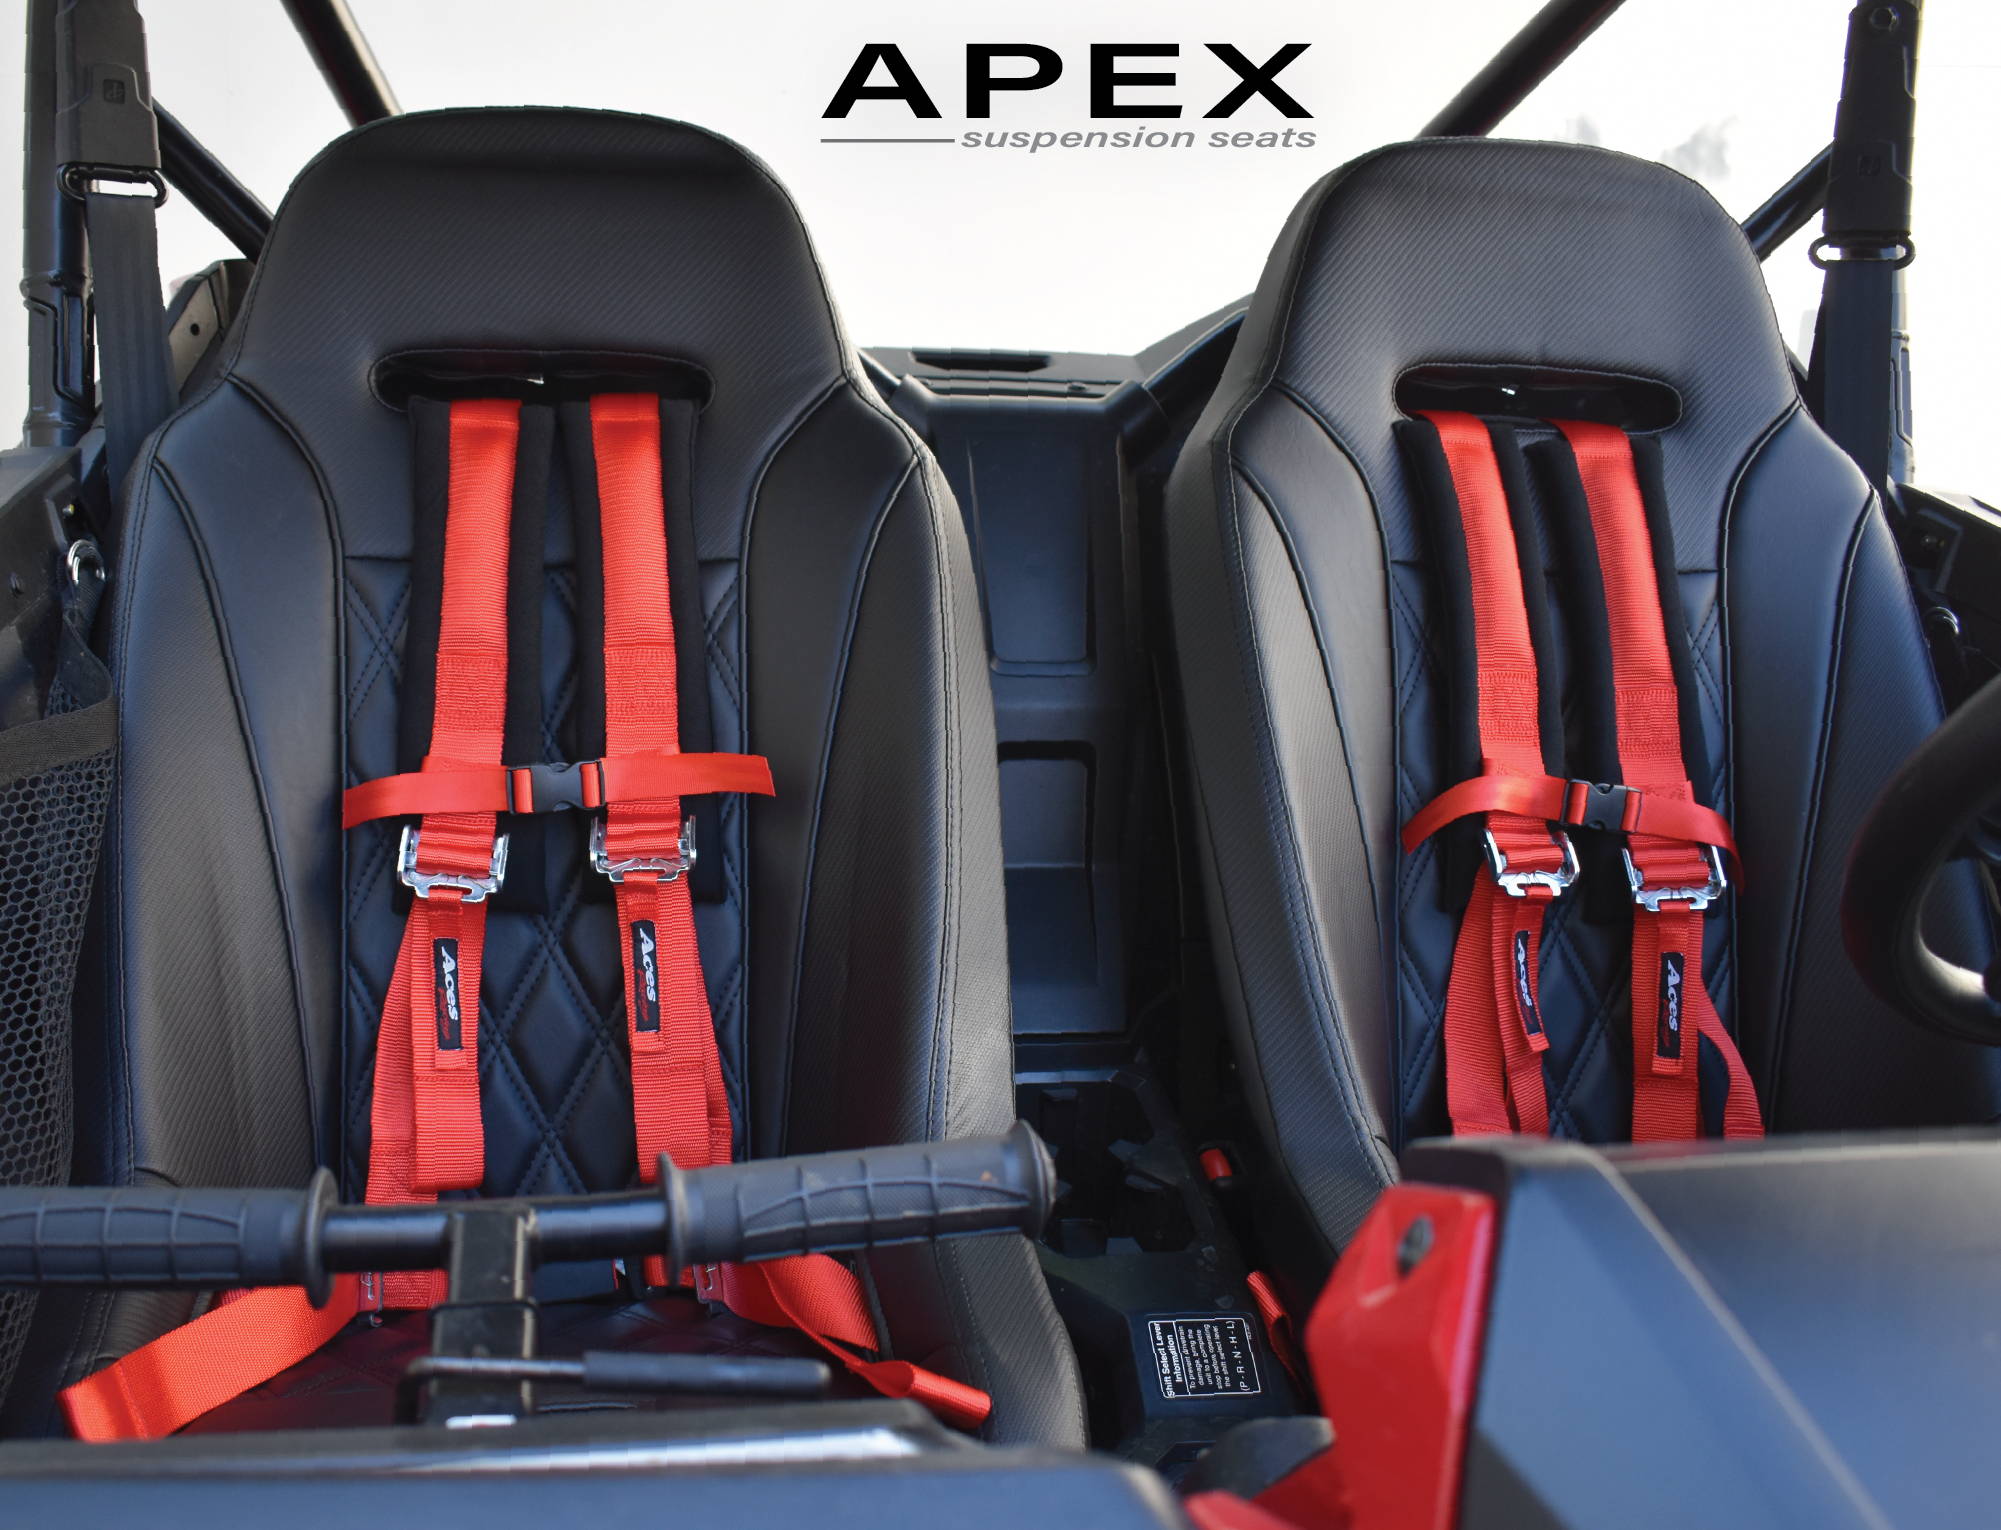 Black Apex suspension seats with red harnesses